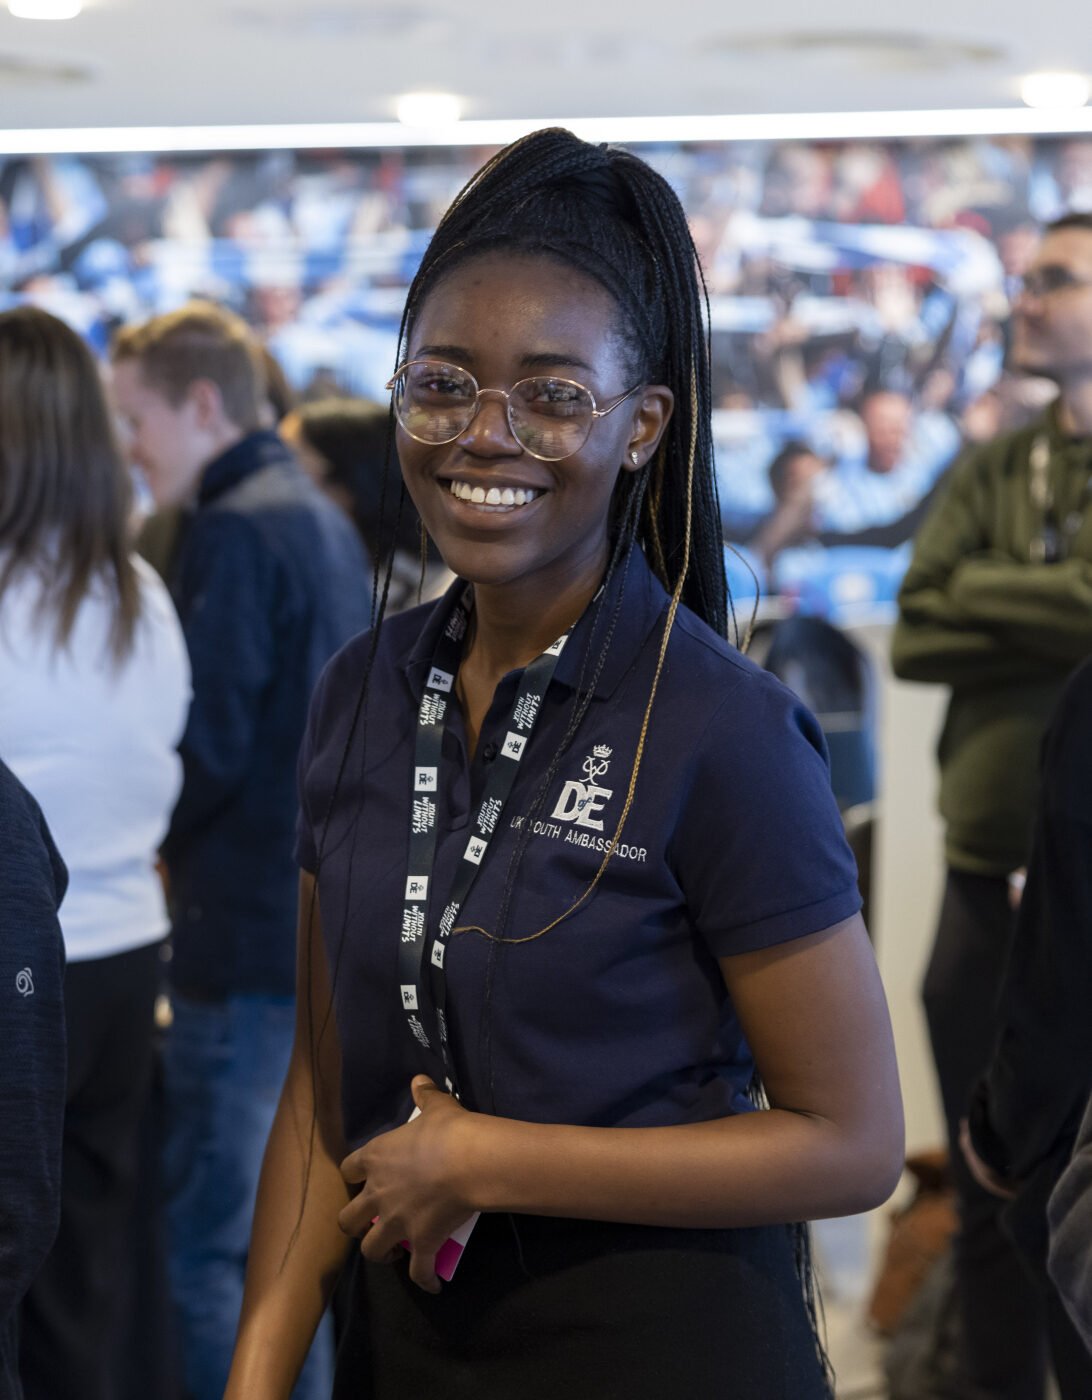 A DofE UK Youth Ambassadors smiling to camera at an event. She is wearing a DofE polo.